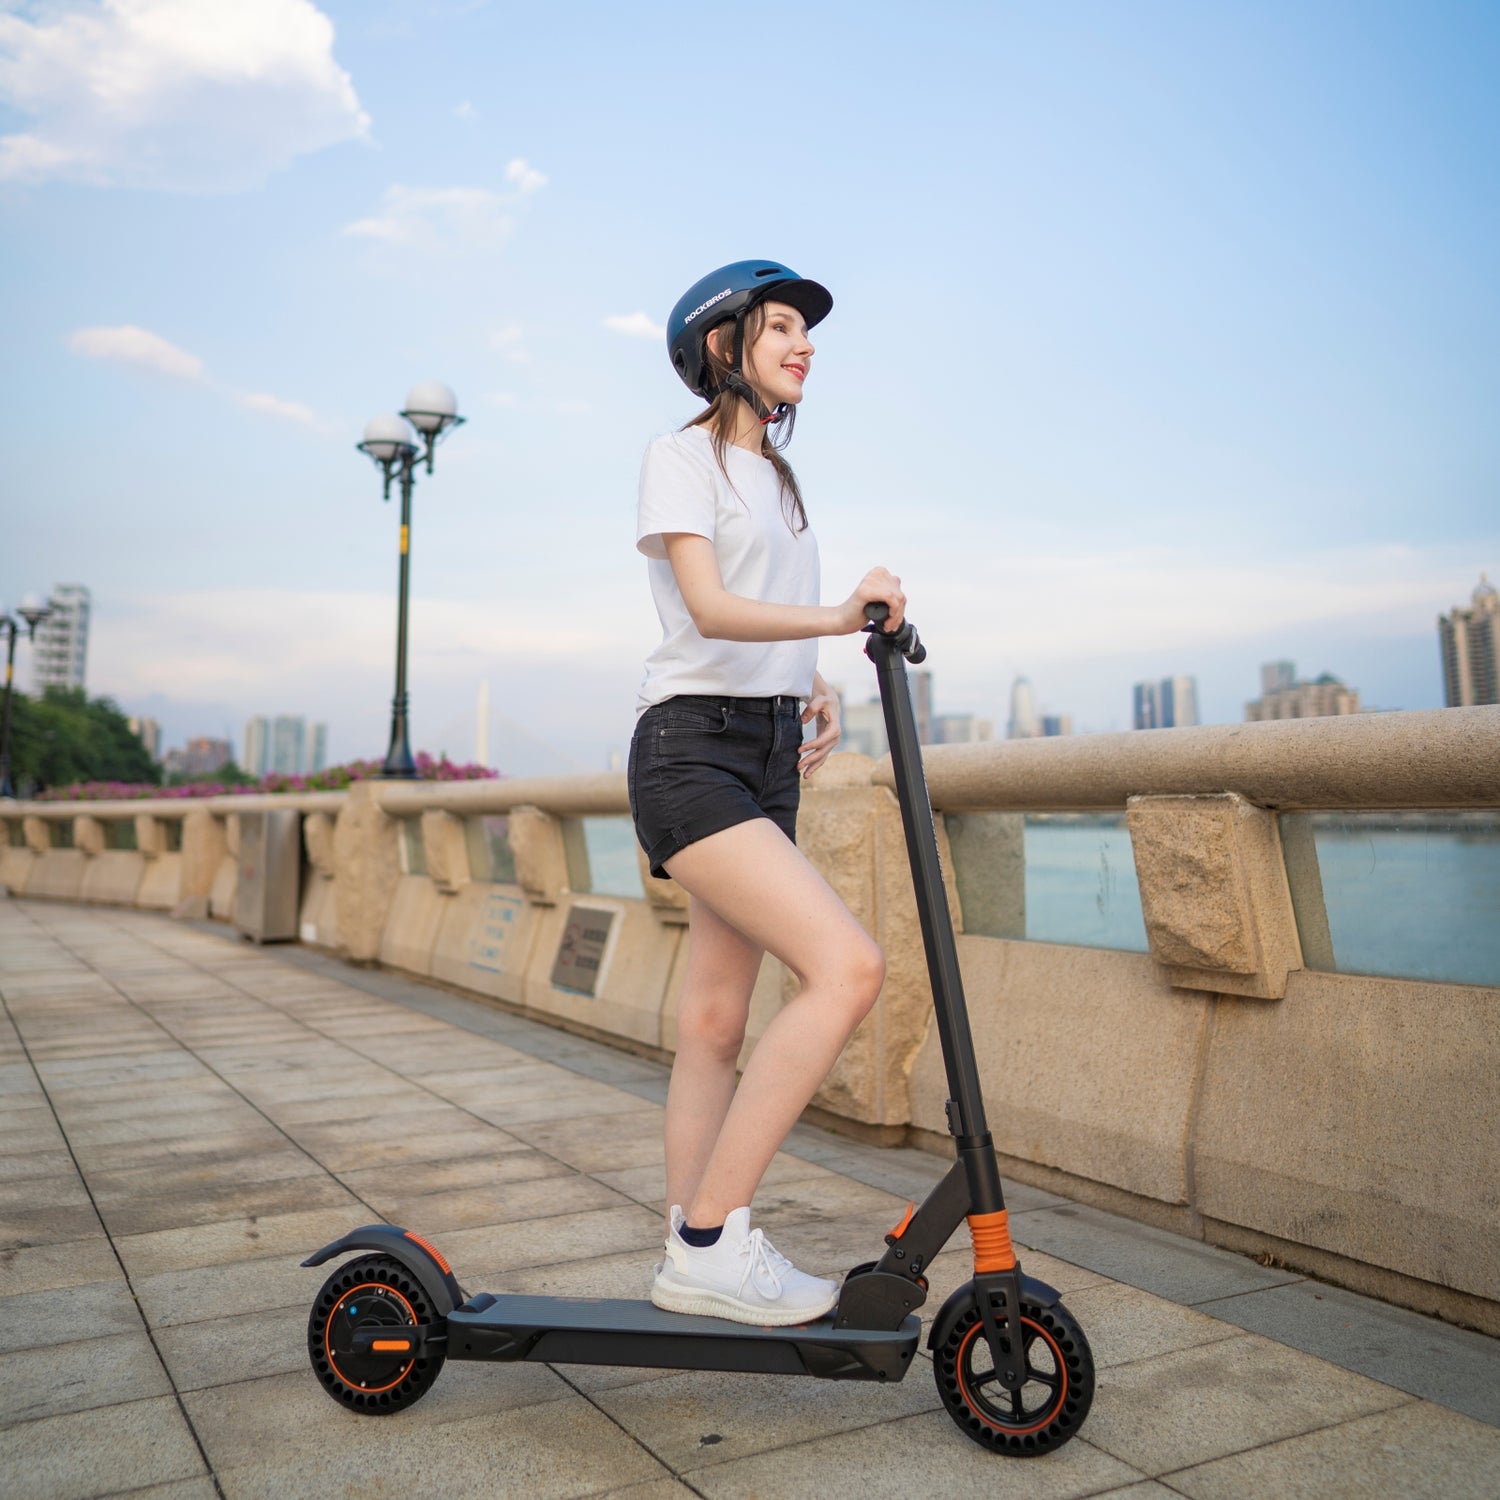 A woman riding the Kugoo Kirin S1 Pro Electric Scooter next to the riverside.